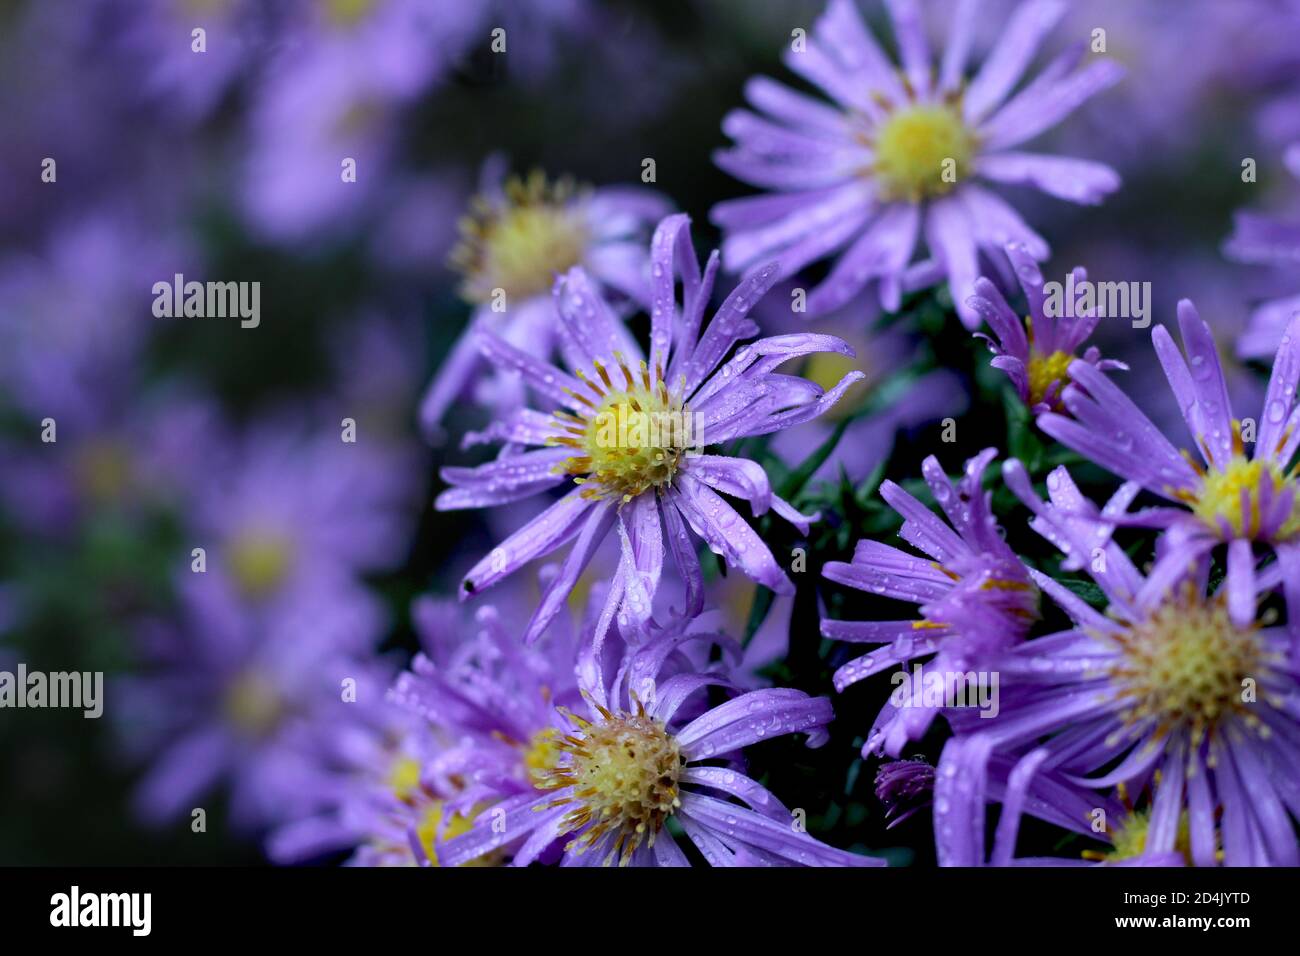 The lovely purple flowers of Symphyotrichum novi belgii, or Michaelmas Daisy. In close up covered in early morning dew with copyspace to the left. Stock Photo